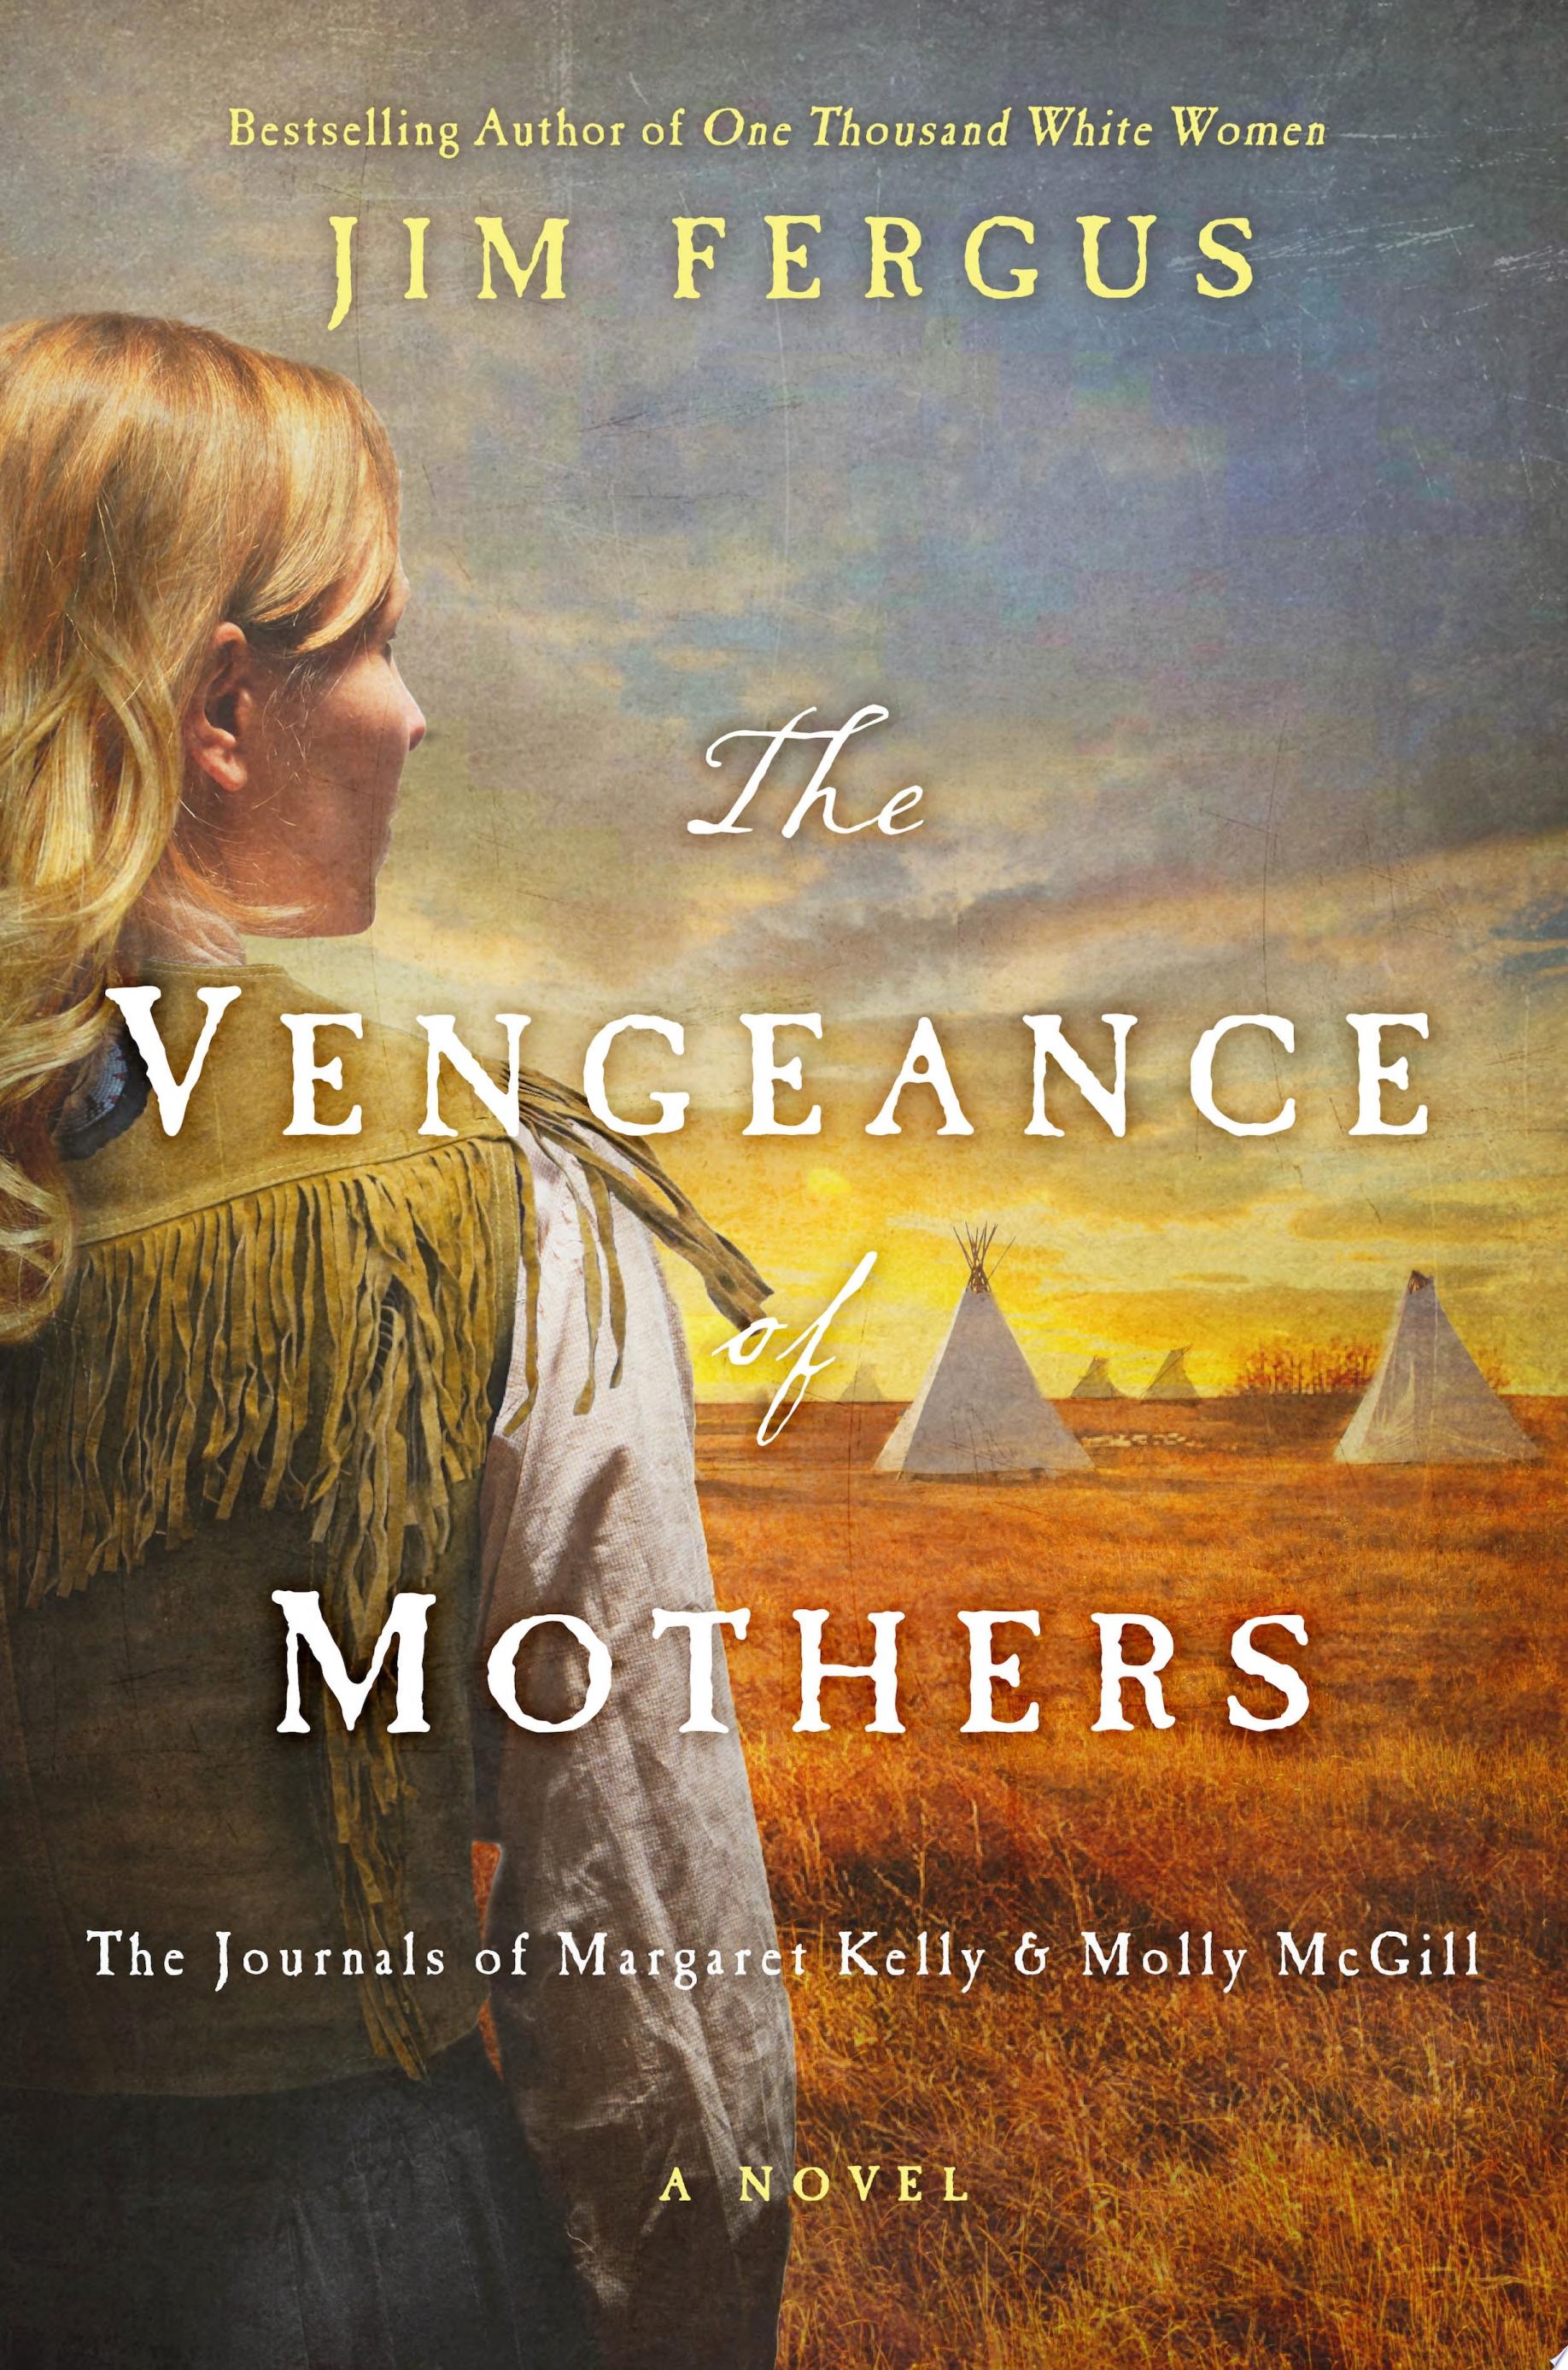 Image for "The Vengeance of Mothers"